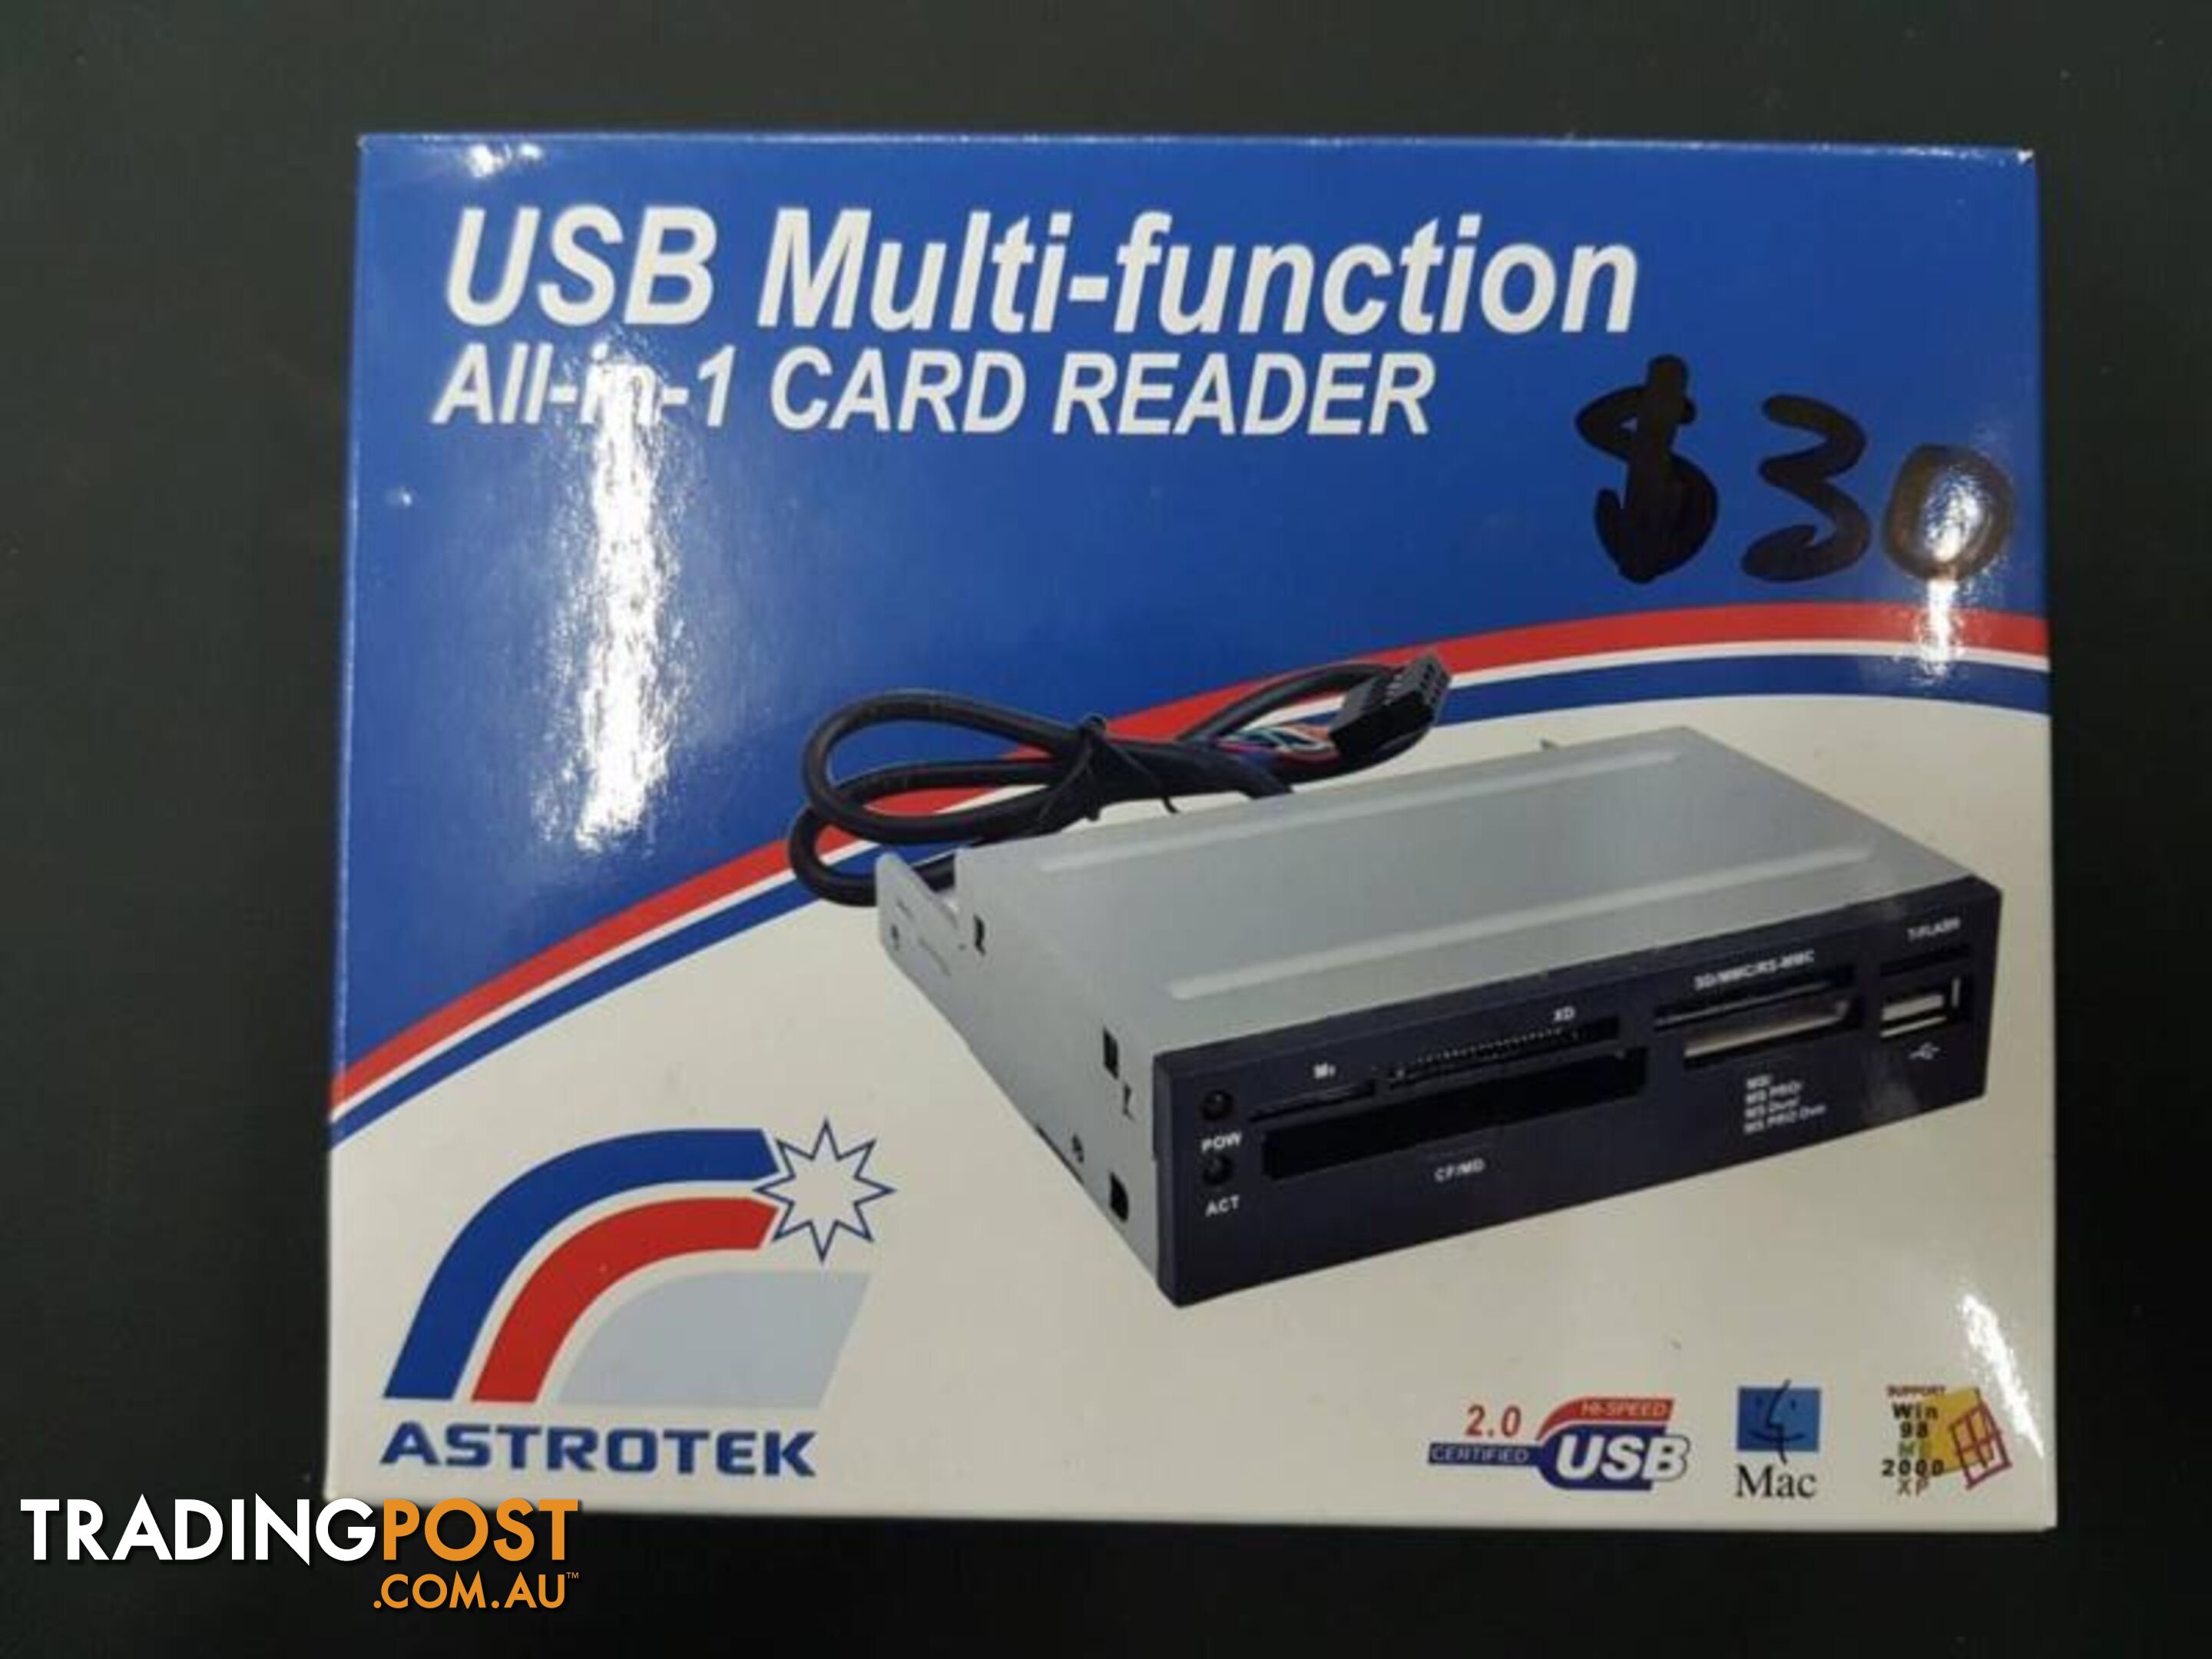 USB Multi-Function All-in-1 CARD READER